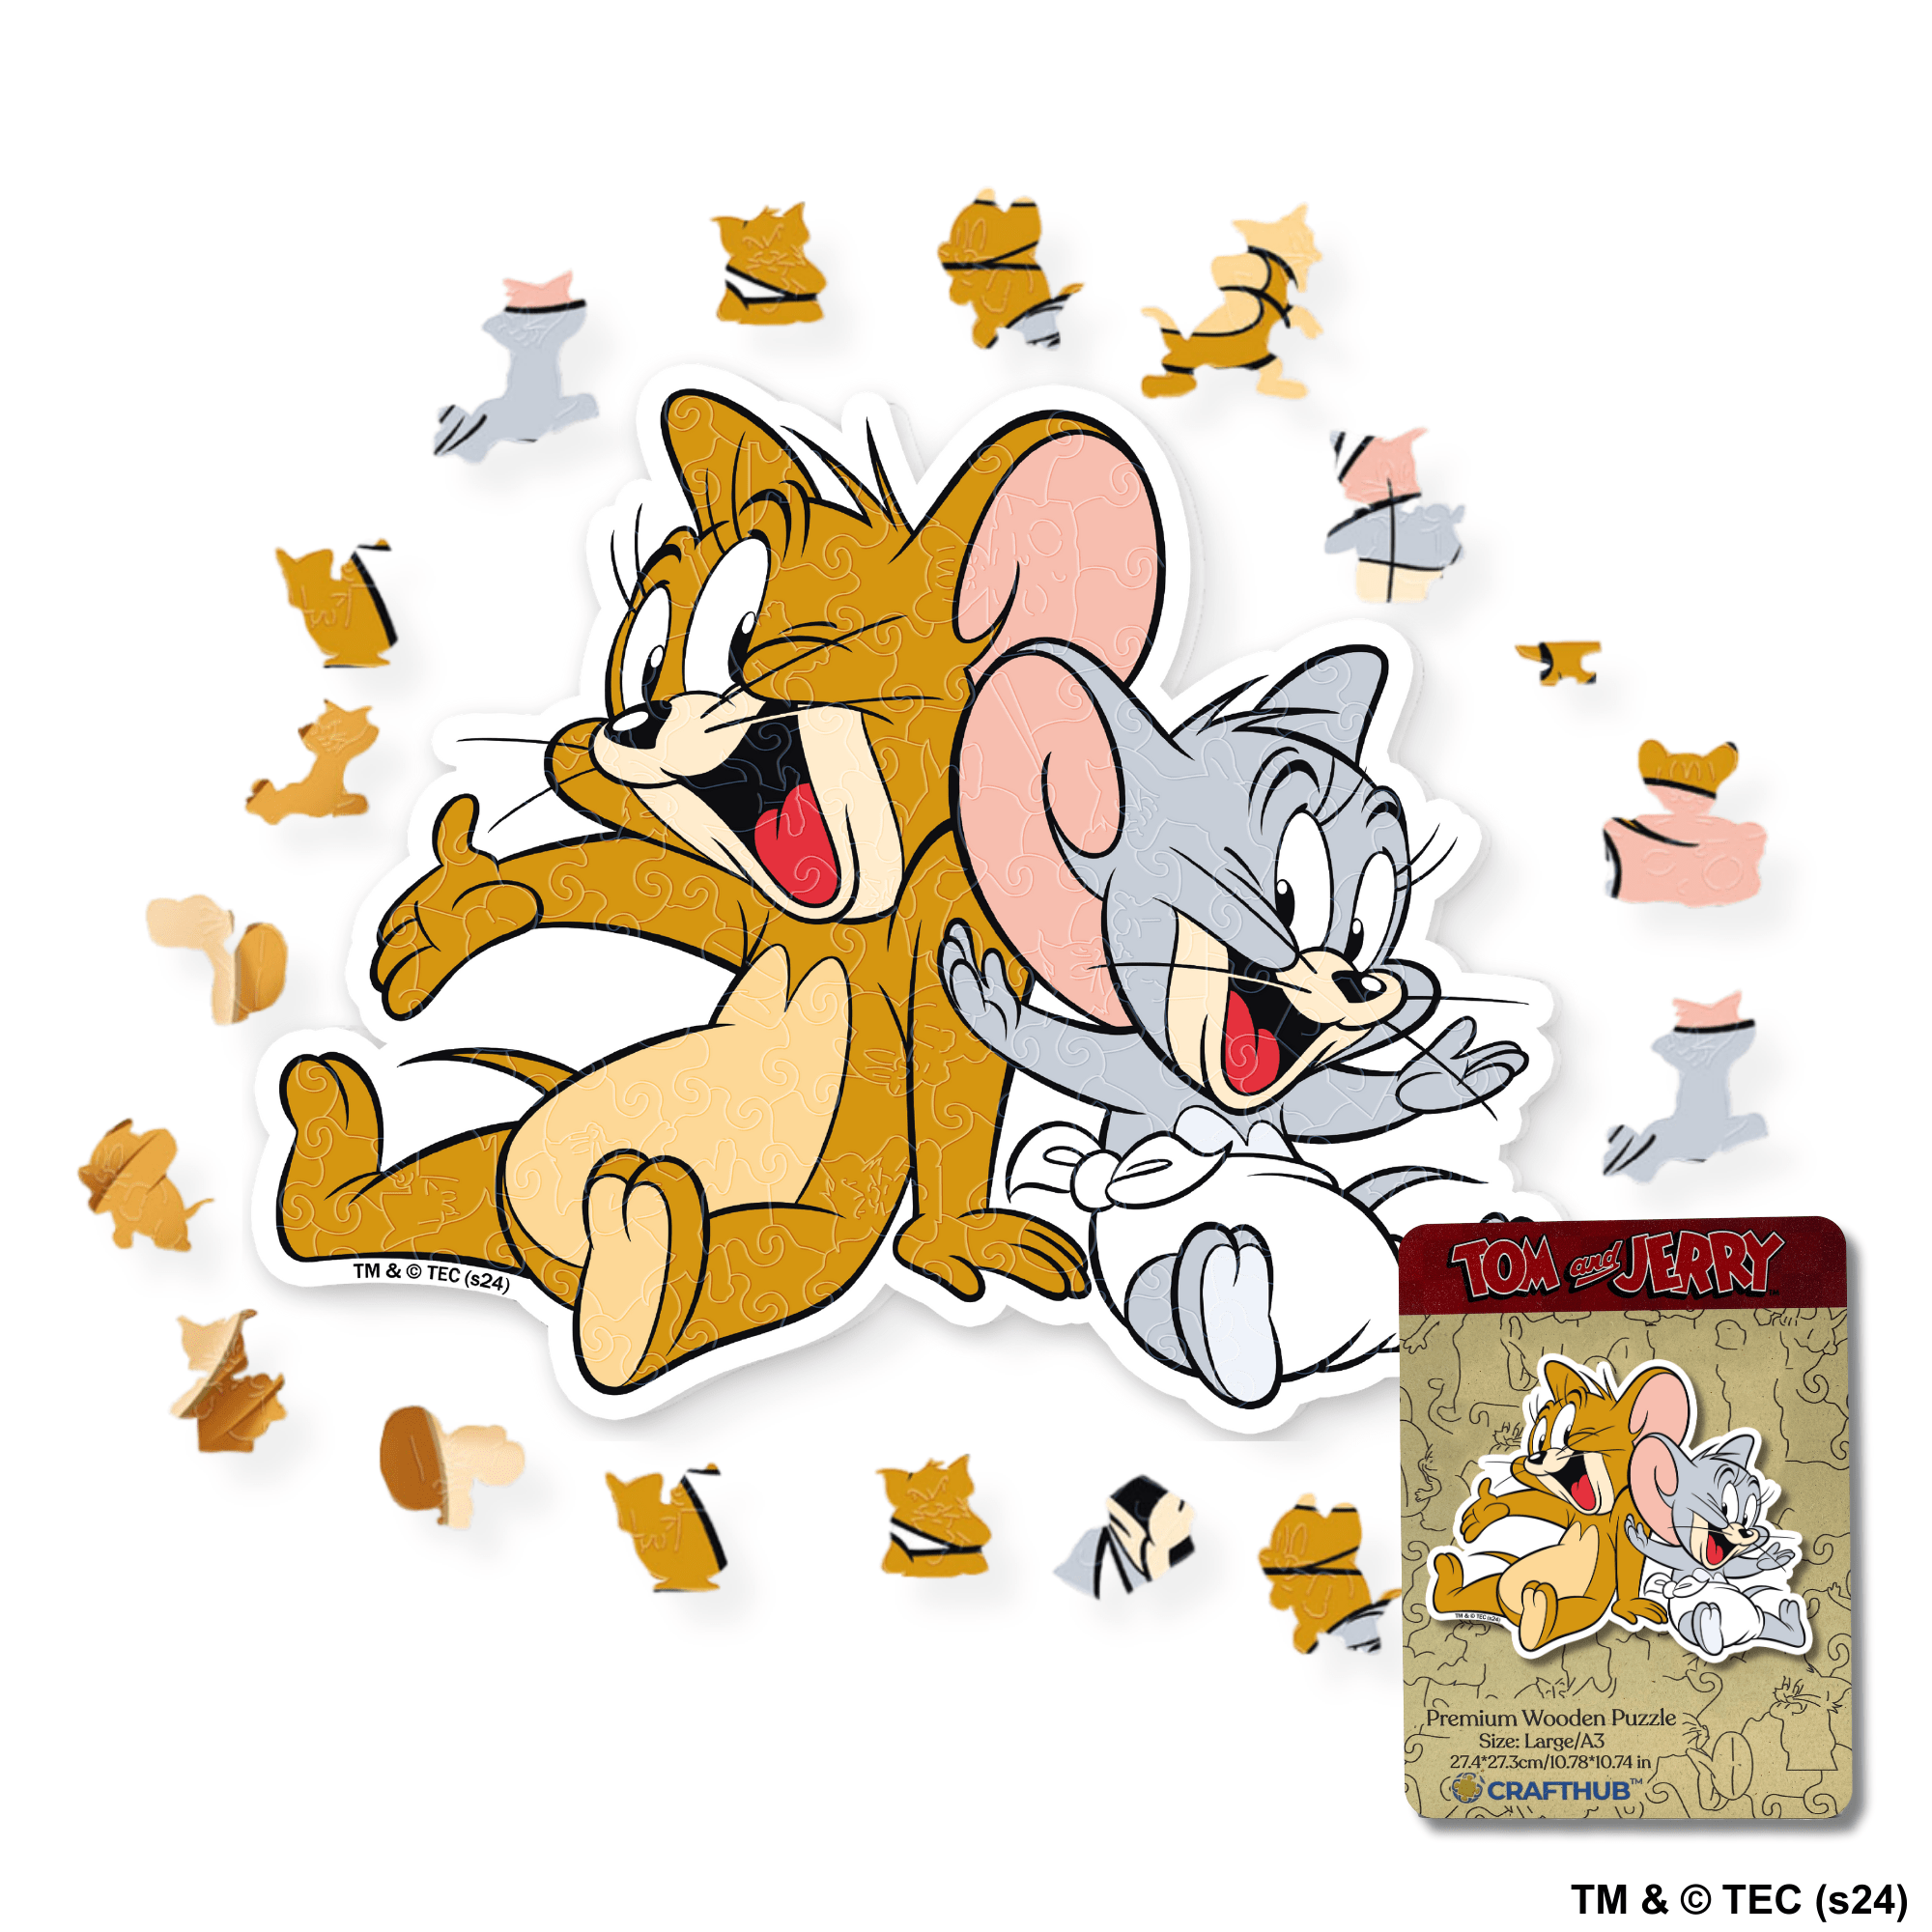 Animal Jigsaw Puzzle > Wooden Jigsaw Puzzle > Jigsaw Puzzle A3 Jerry & Tuffy Wooden Jigsaw Puzzle